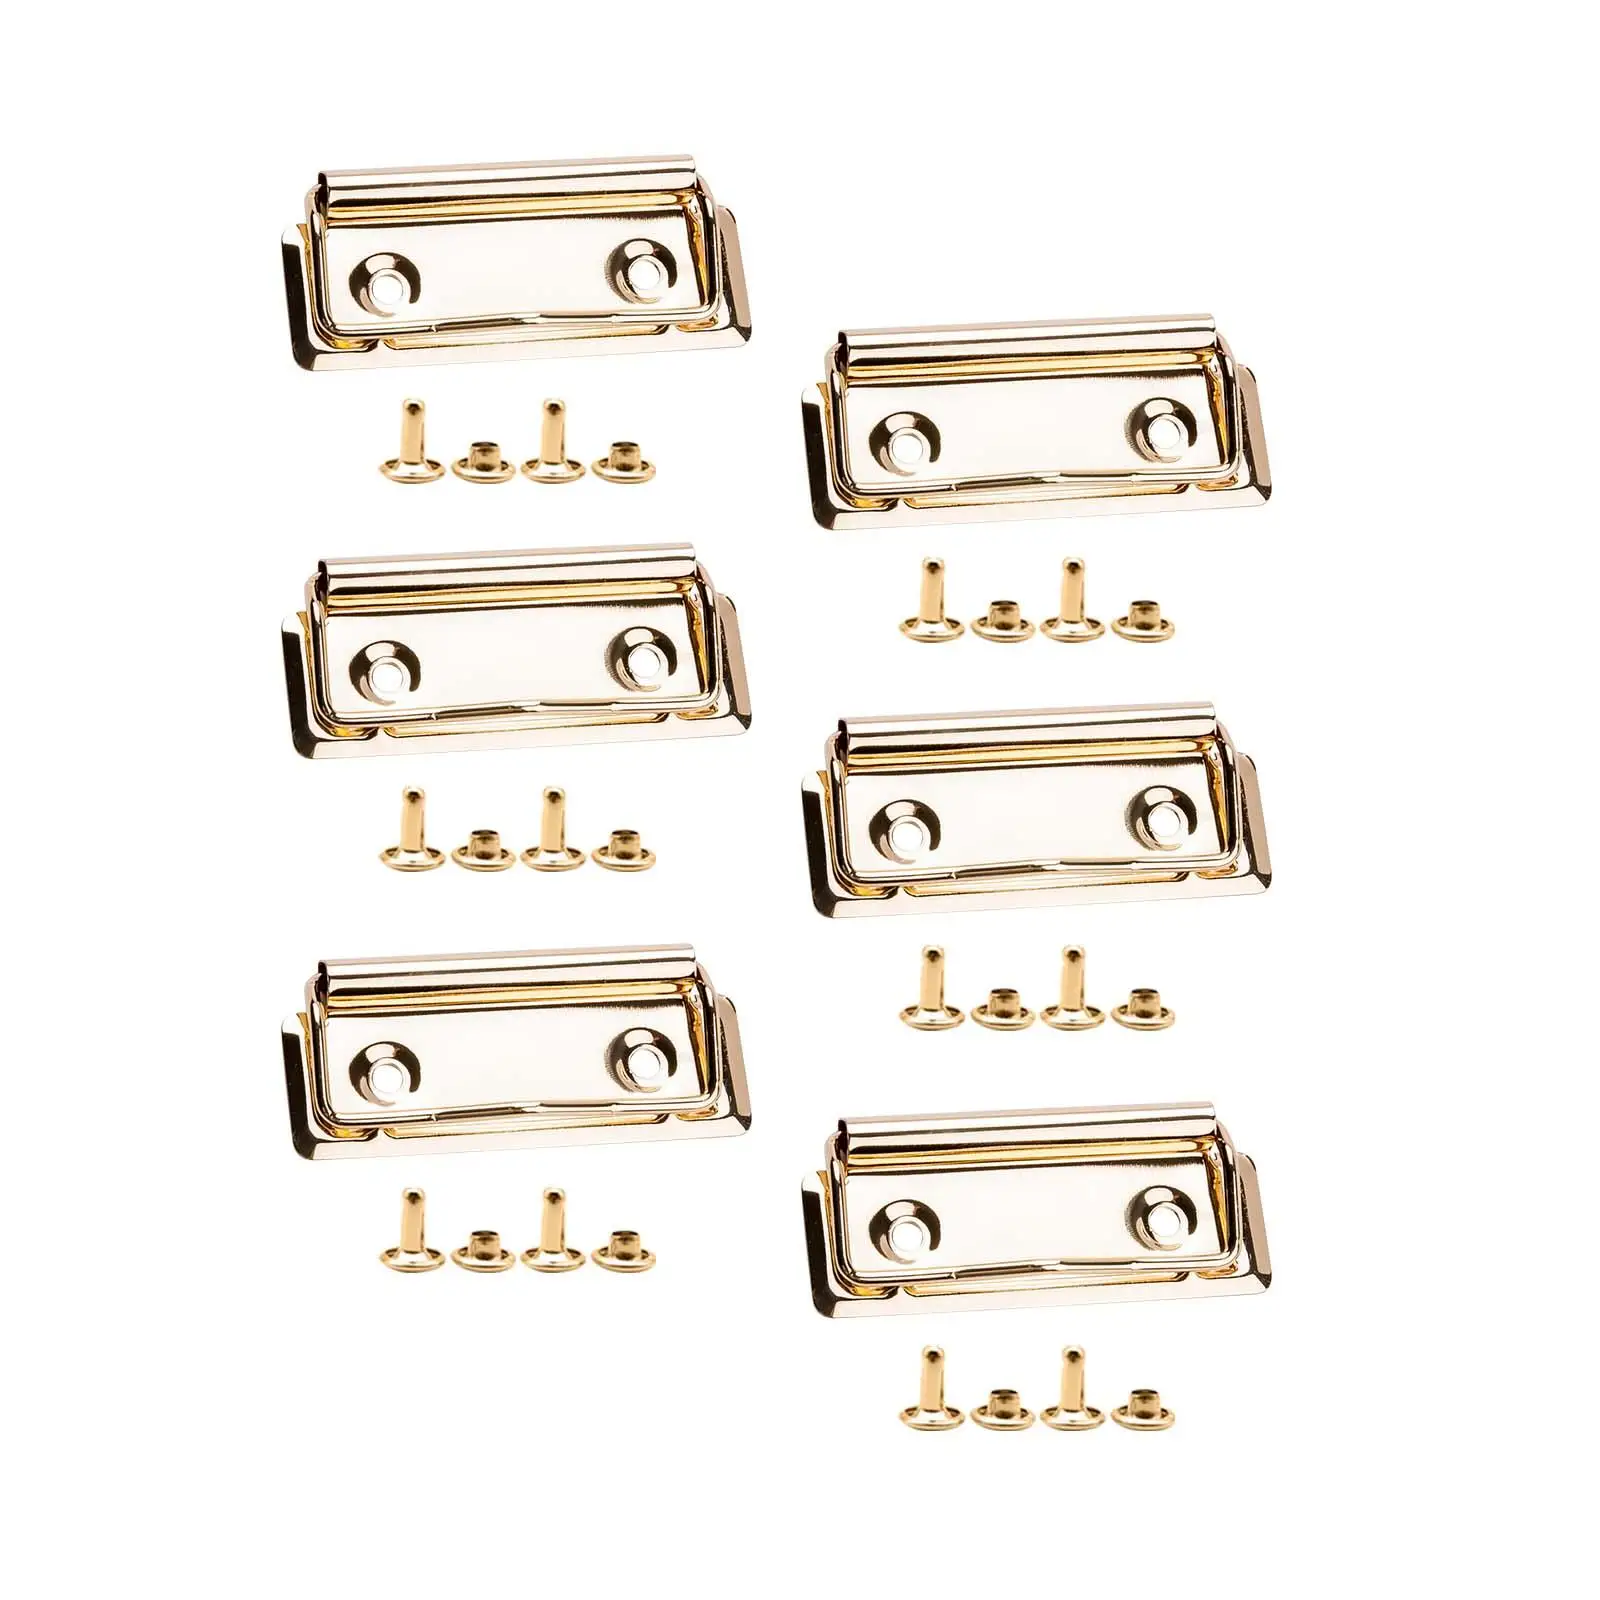 6Pcs Clips for Clipboard Hardware Heavy Duty Lightweight Iron Low Profile Clipboard Clips for Business Stationery Supplies Class